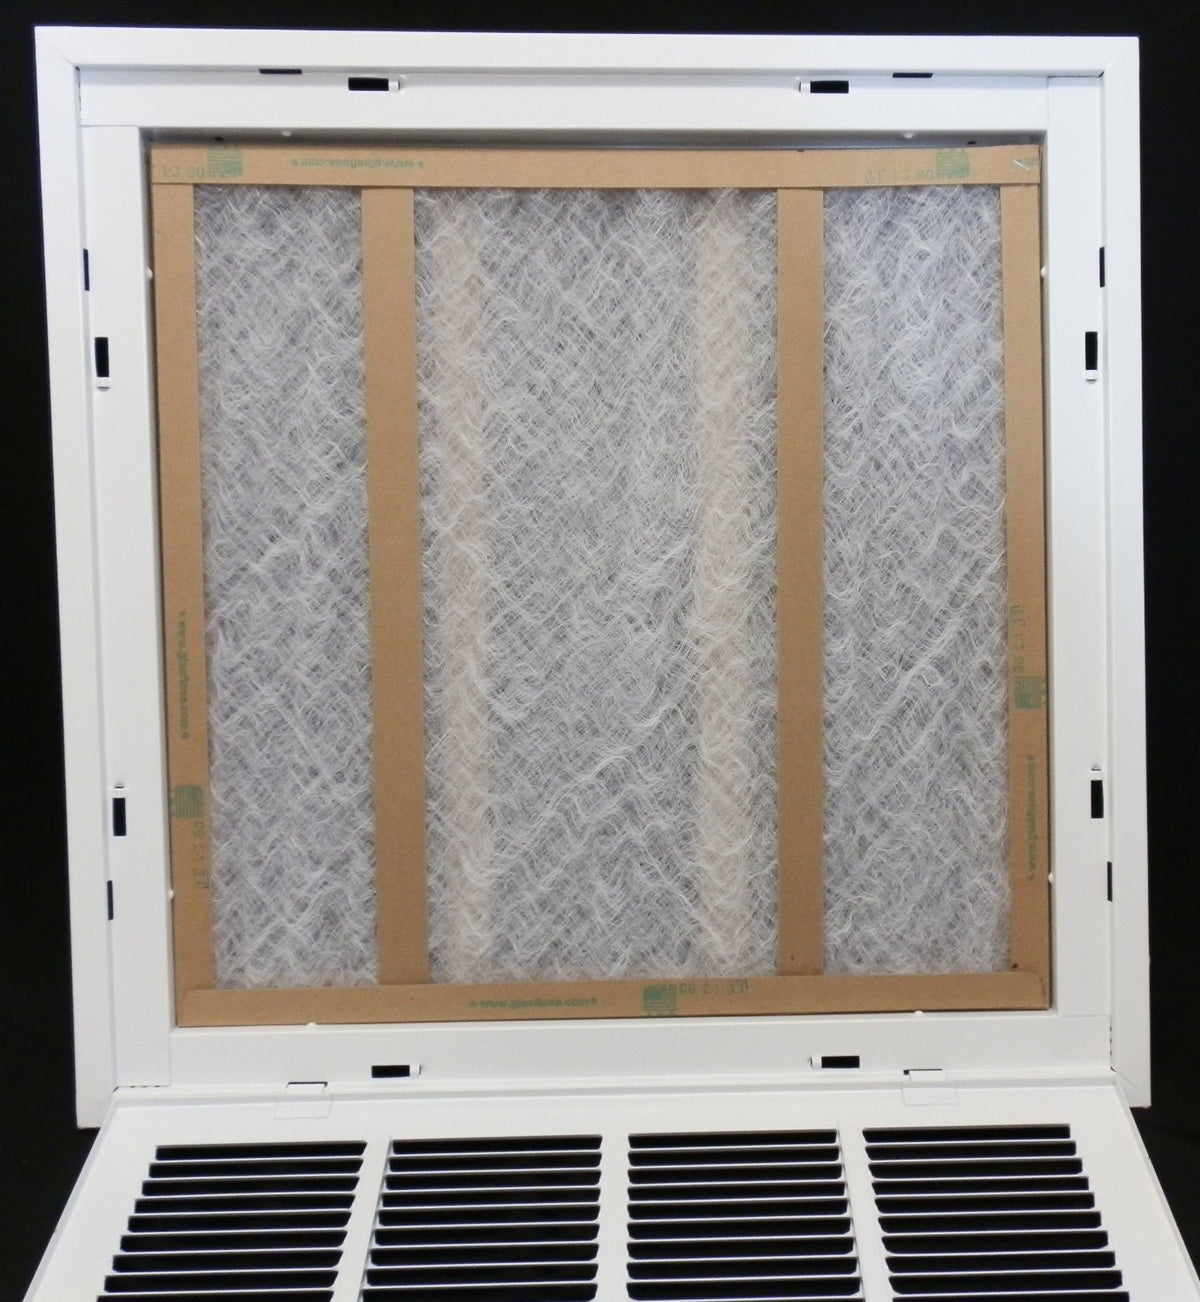 12&quot; X 12&quot; Steel Return Air Filter Grille for 1&quot; Filter Removable Face/Door